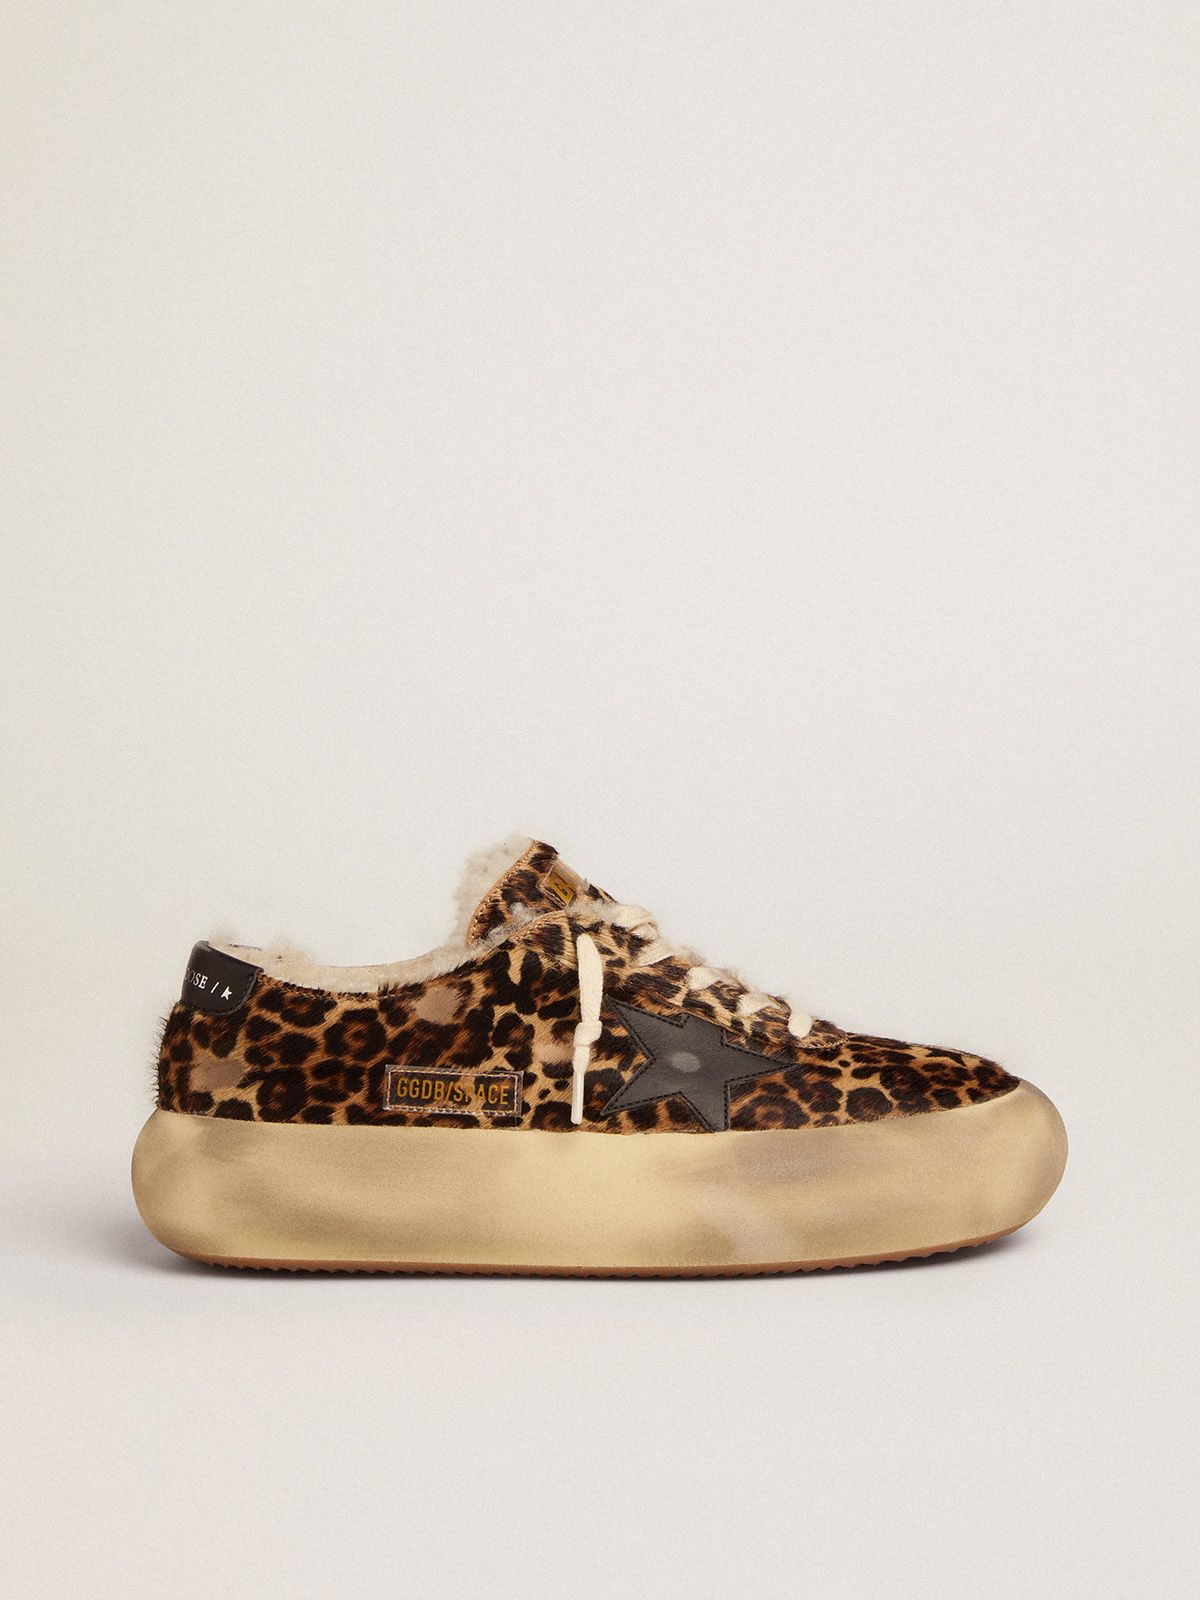 golden goose in shoes pony animal-print lining skin shearling with Space-Star